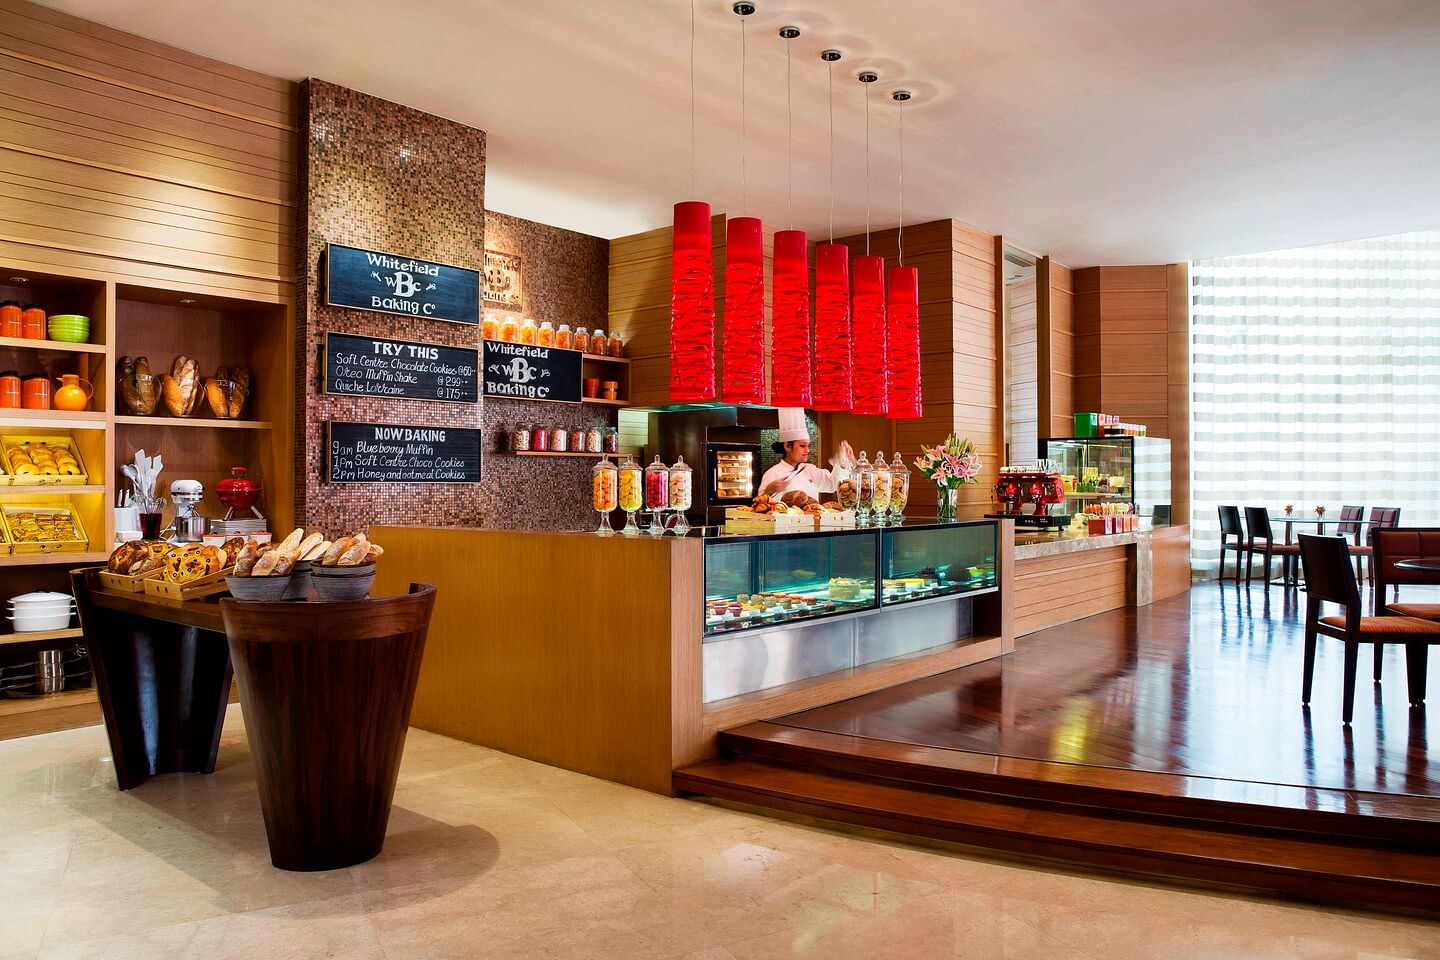 Marriott Whitefield in Whitefield, Bangalore